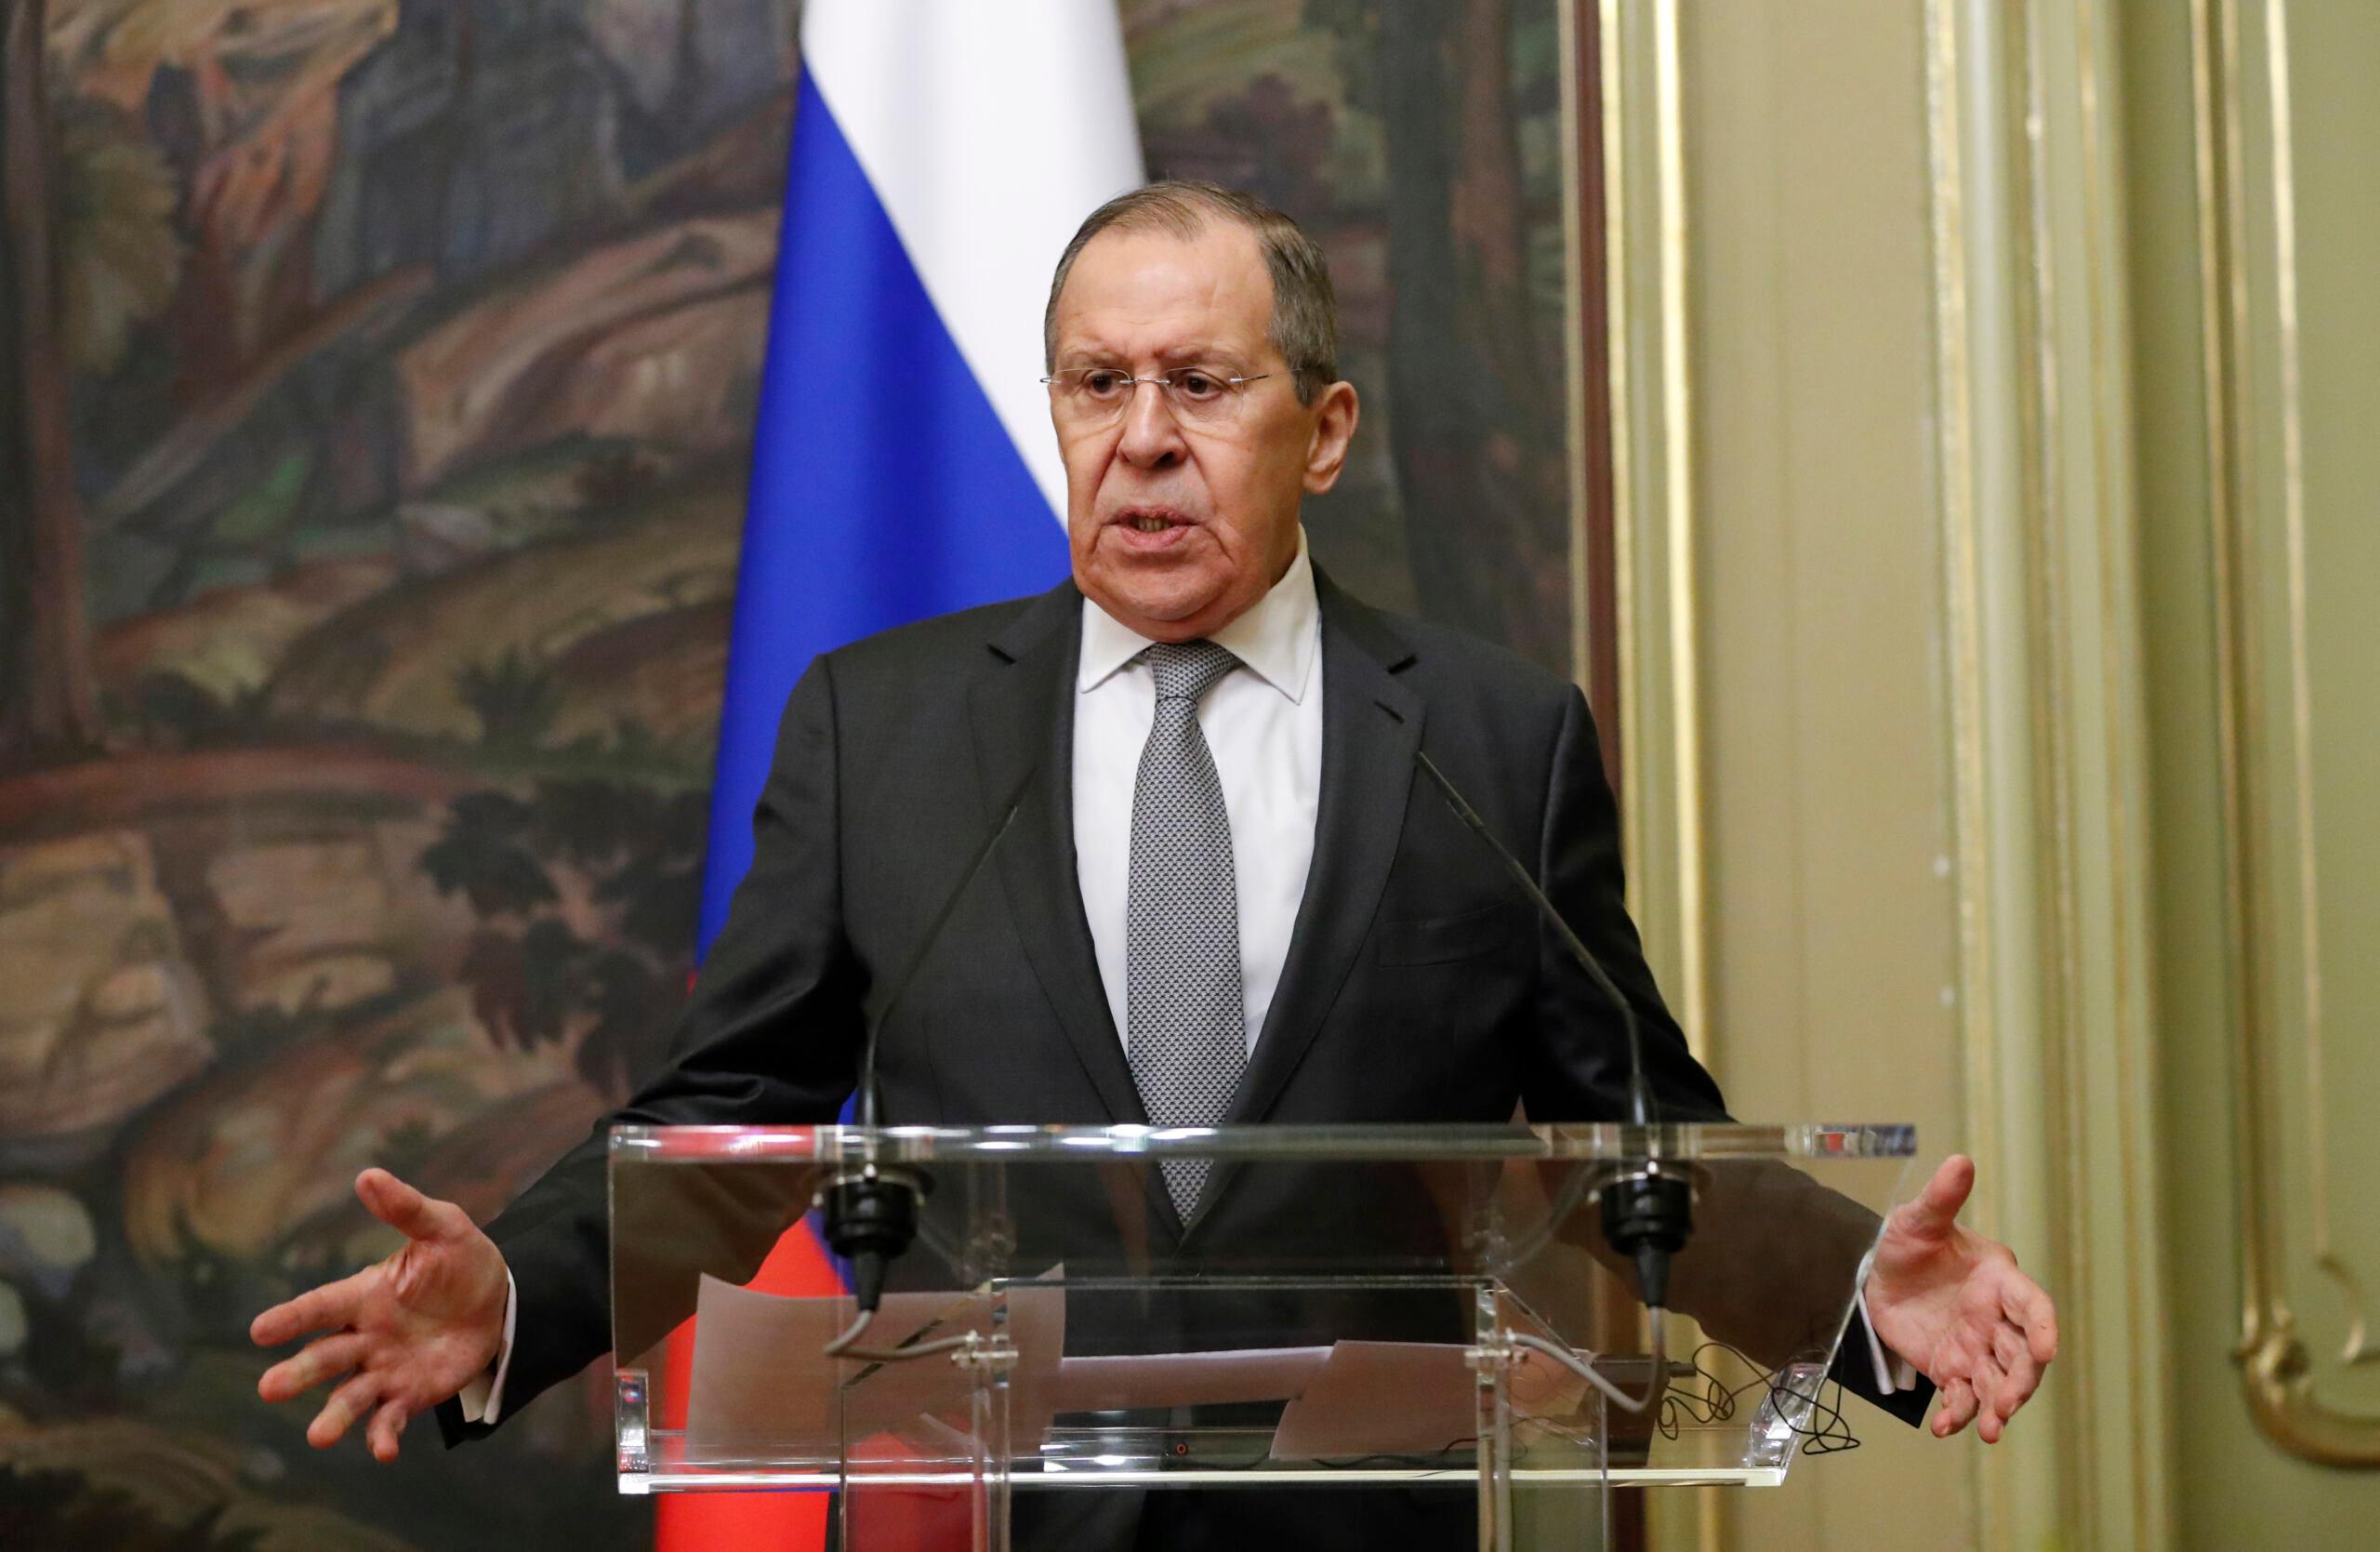 Russian Foreign Minister Sergei Lavrov gestures during a press conference following talks with his Italian counterpart in Moscow, on February 17, 2022. (Photo by SHAMIL ZHUMATOV / POOL / AFP)